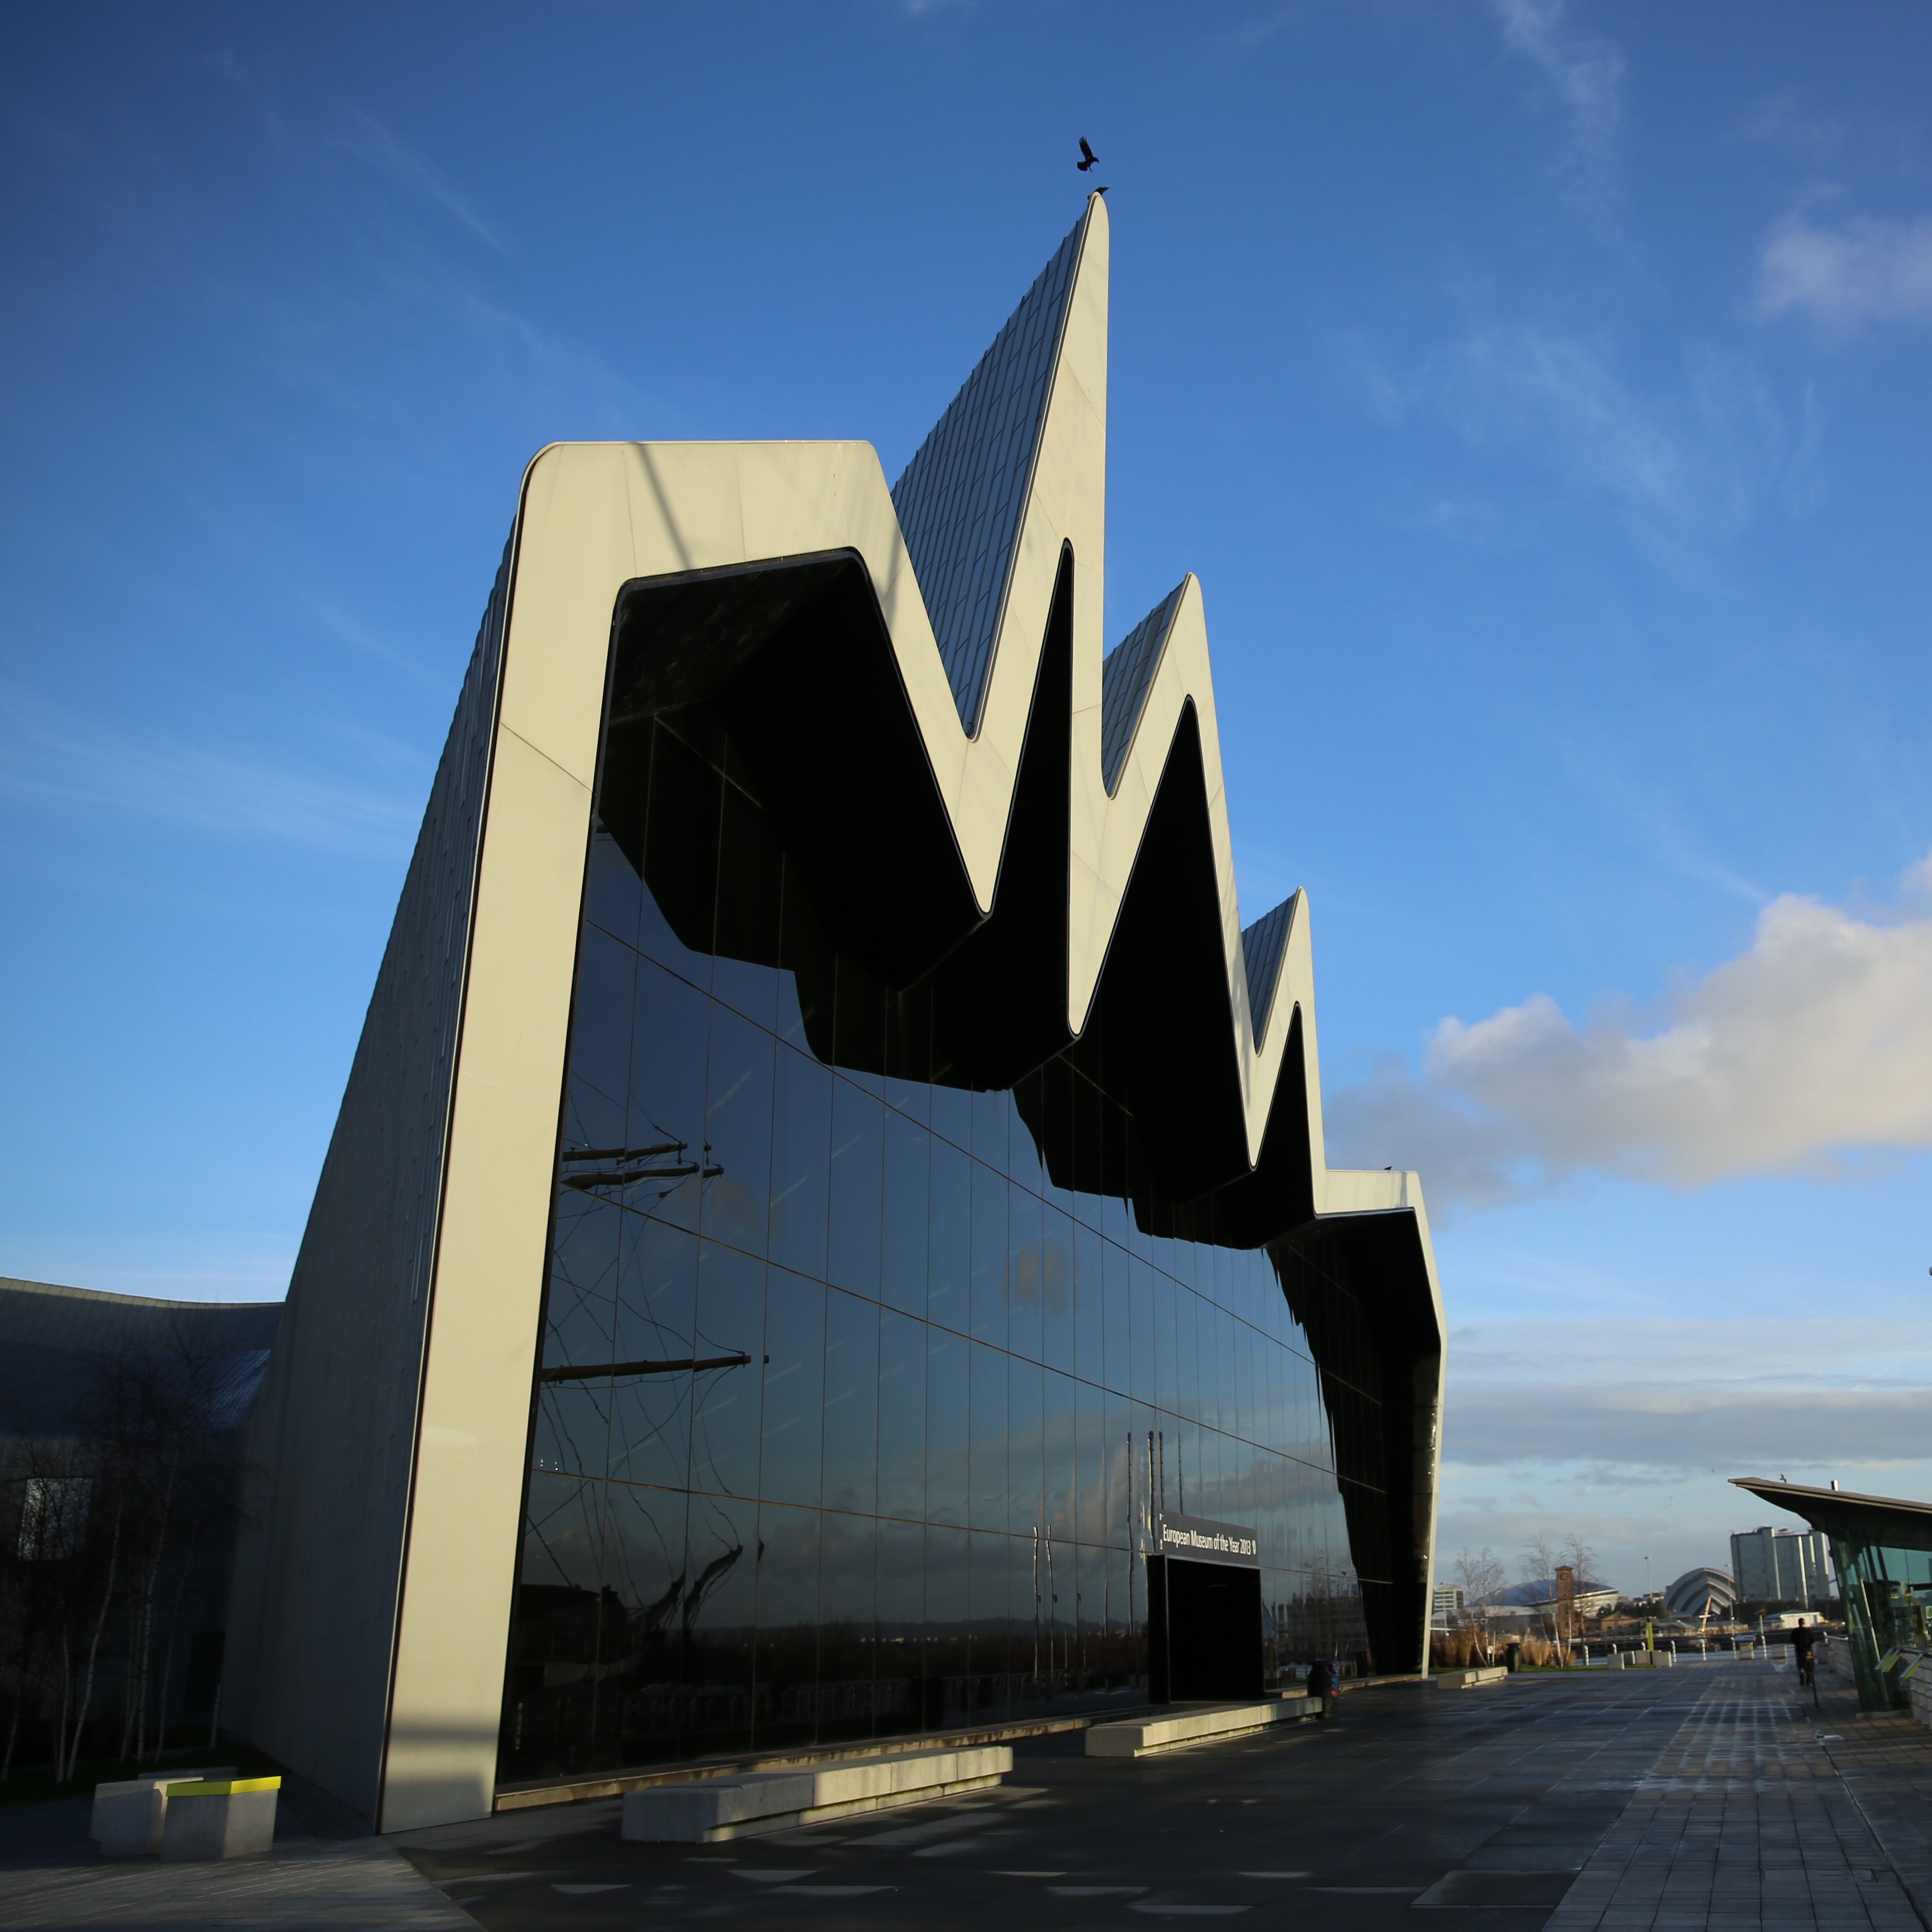 Photo of the Riverside Museum with a blue sky in the background. The building's visible wall is entirely glass, with a jagged metal framework outline.